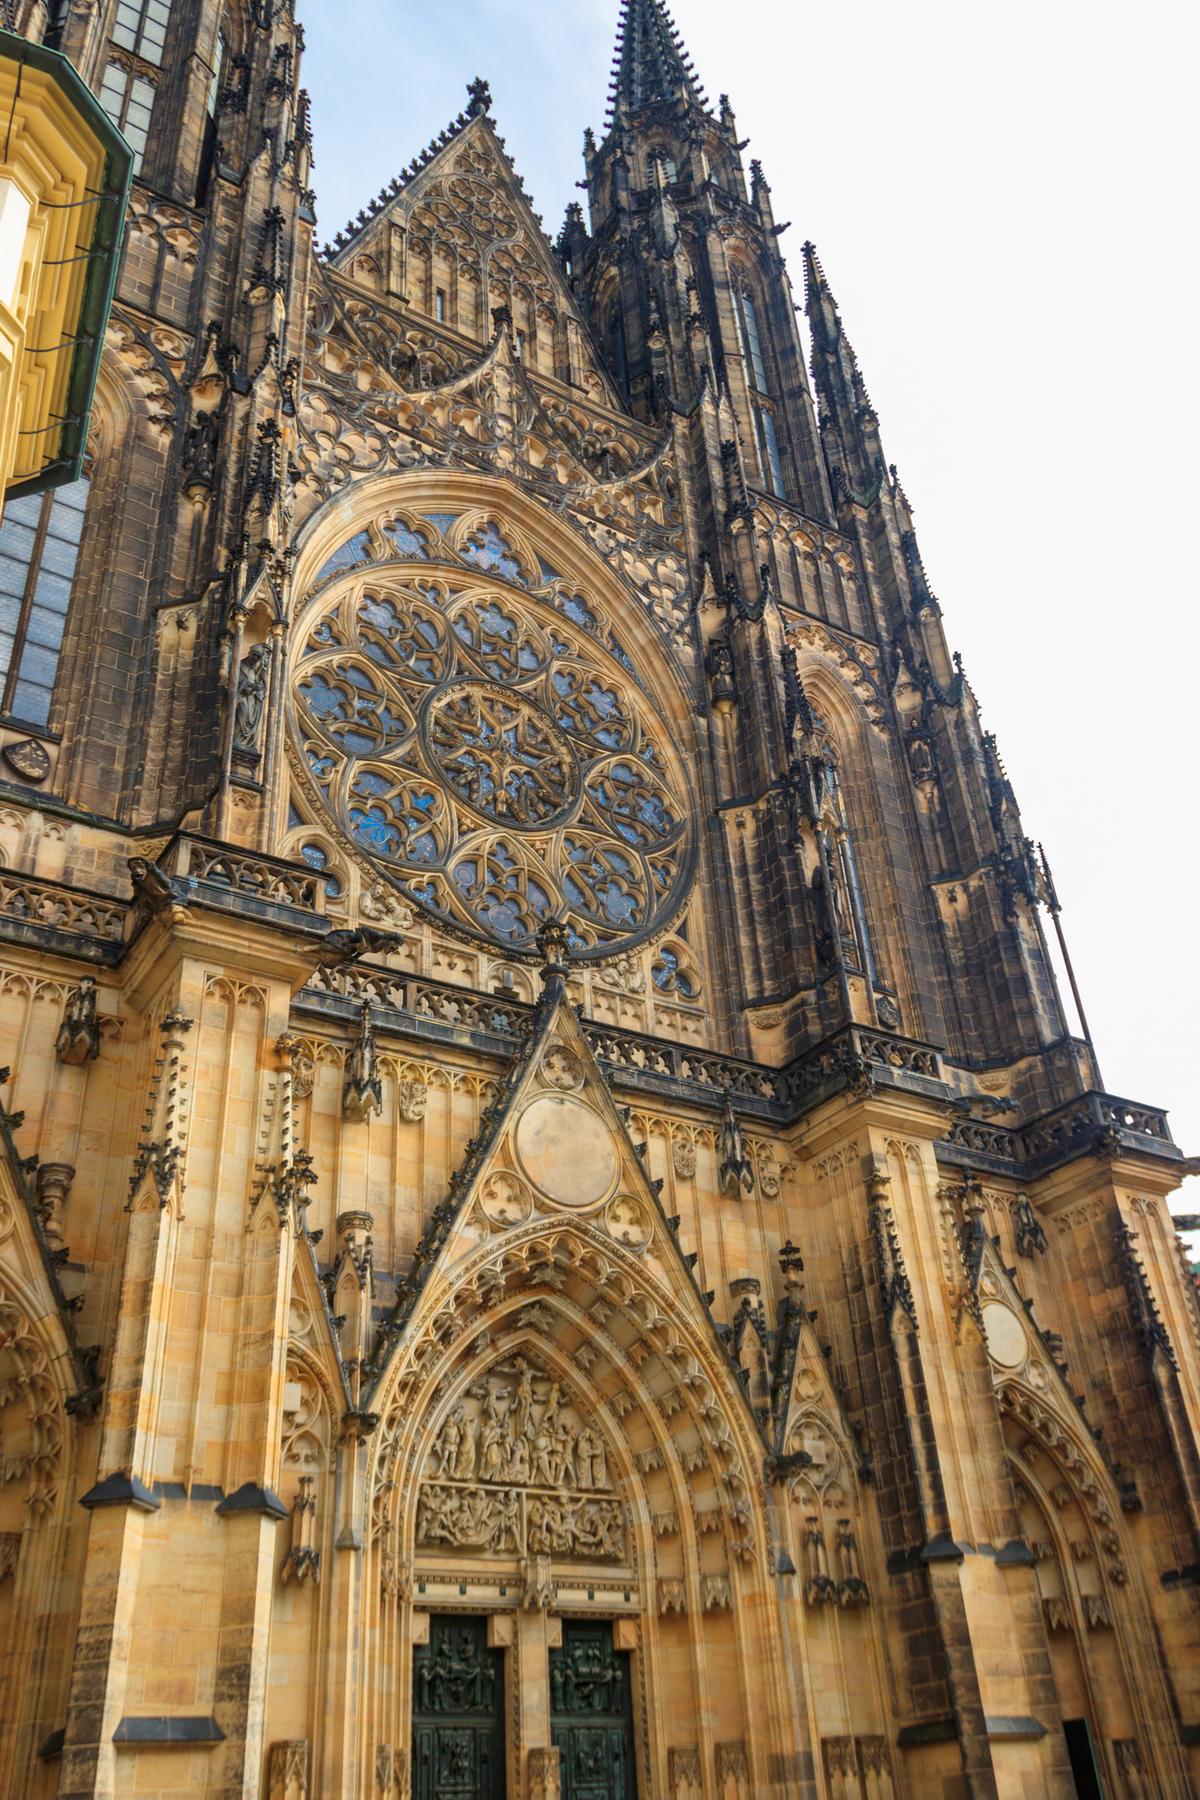 The ornate facade of the St. Vitus Cathedral. (OlyaSolodenko/iStock/Getty Images Plus)